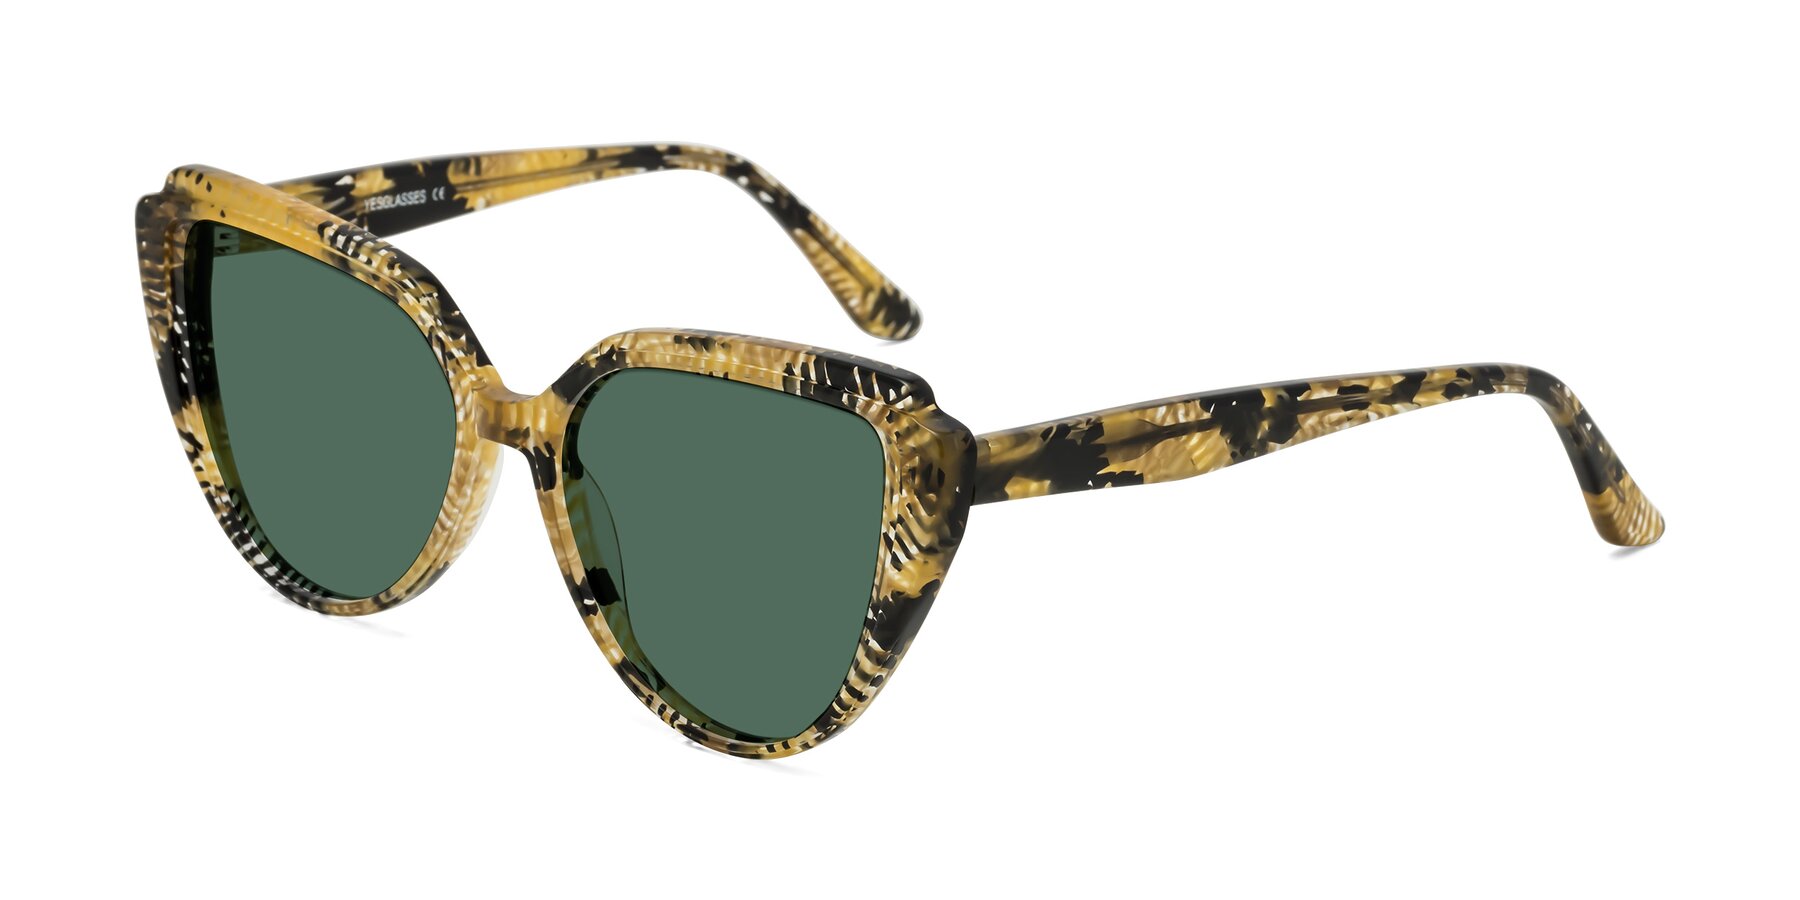 Angle of Zubar in Yellow Snake Print with Green Polarized Lenses